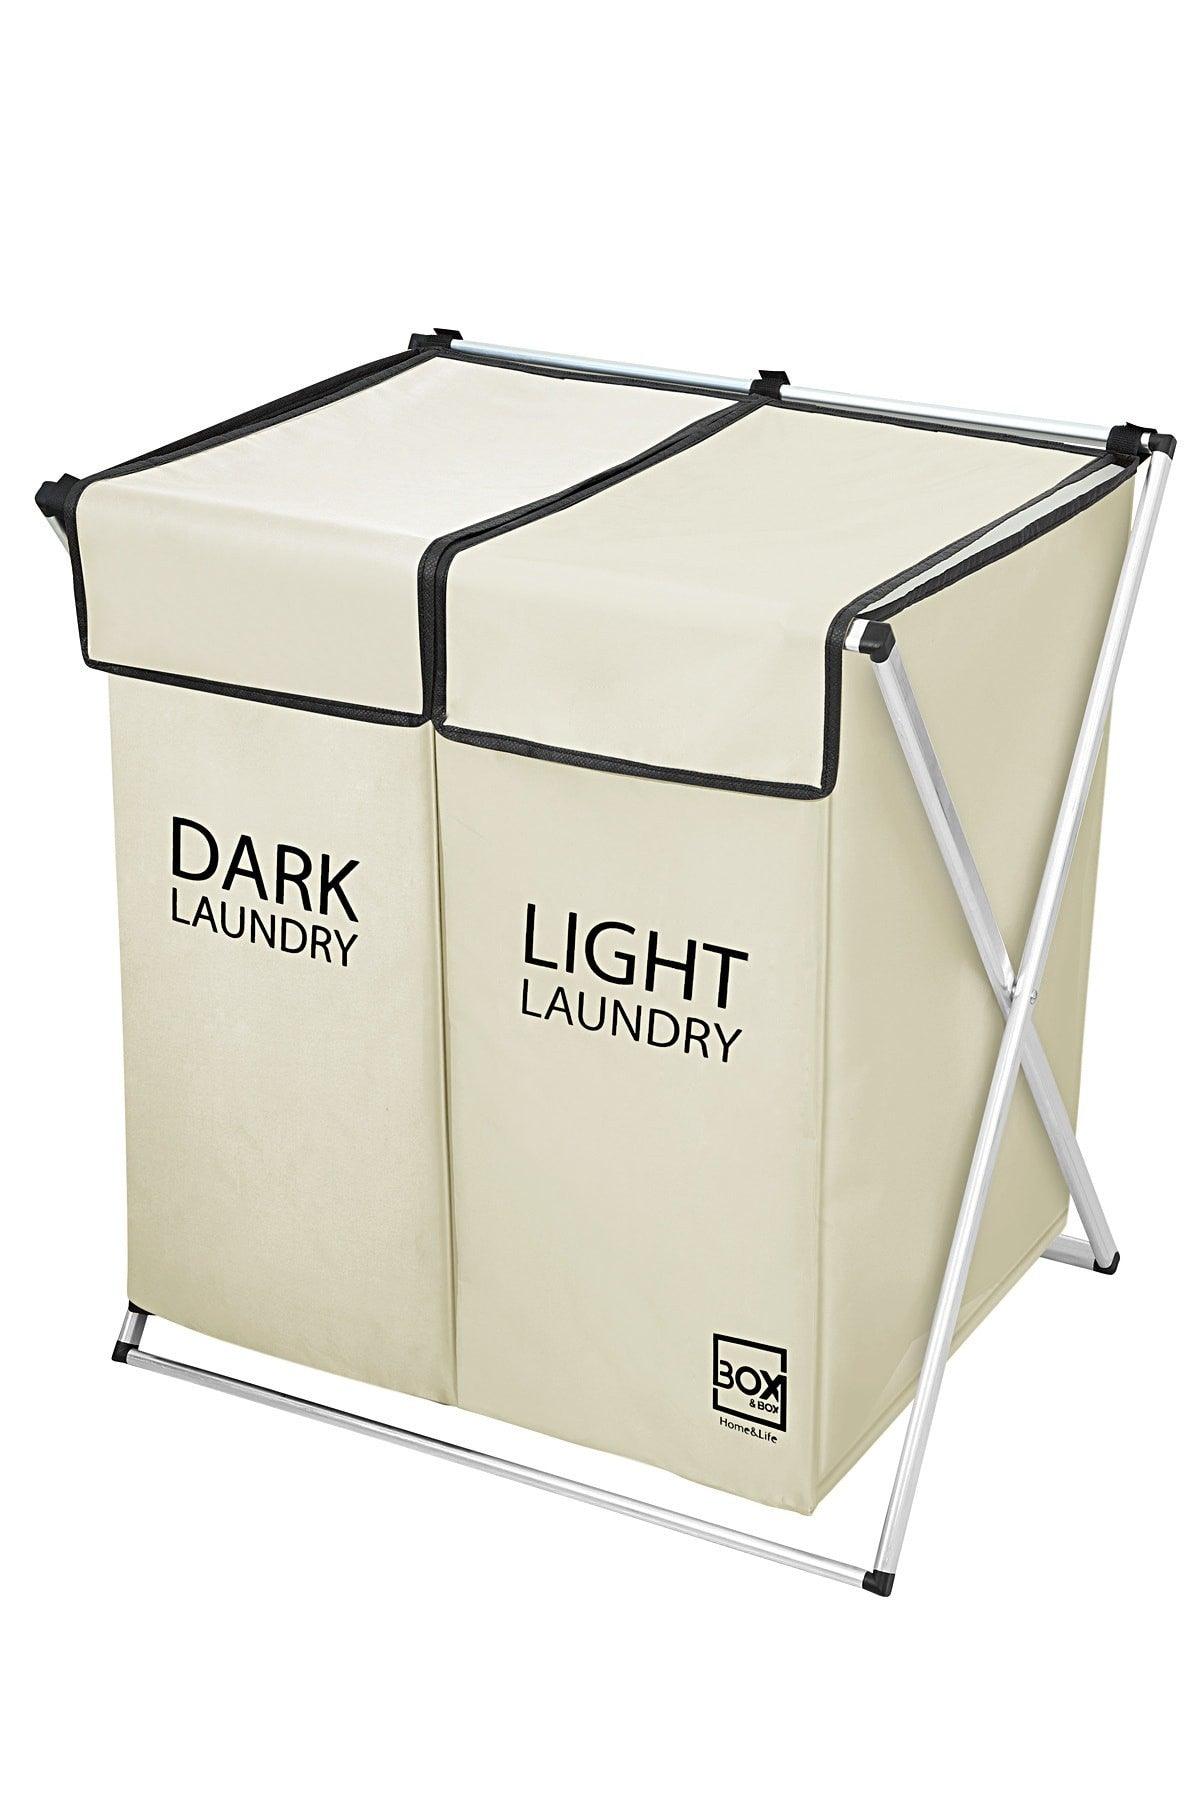 2 Compartment Laundry And Dirty Basket, Cream, Machine Washable Fabric, 54x42x58 Cm - Swordslife